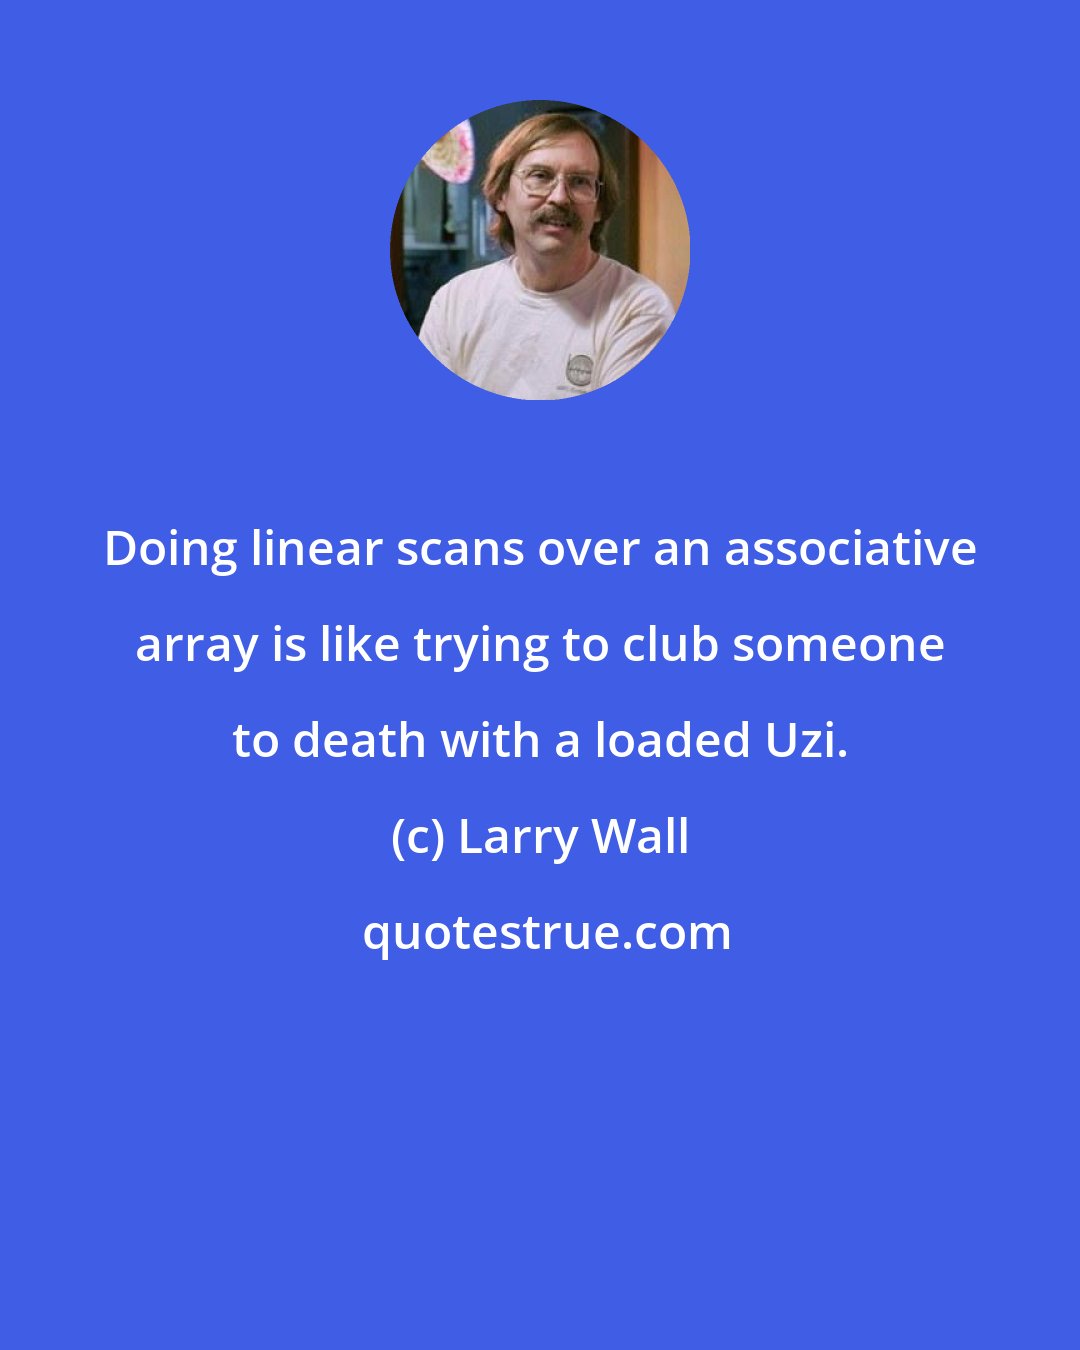 Larry Wall: Doing linear scans over an associative array is like trying to club someone to death with a loaded Uzi.